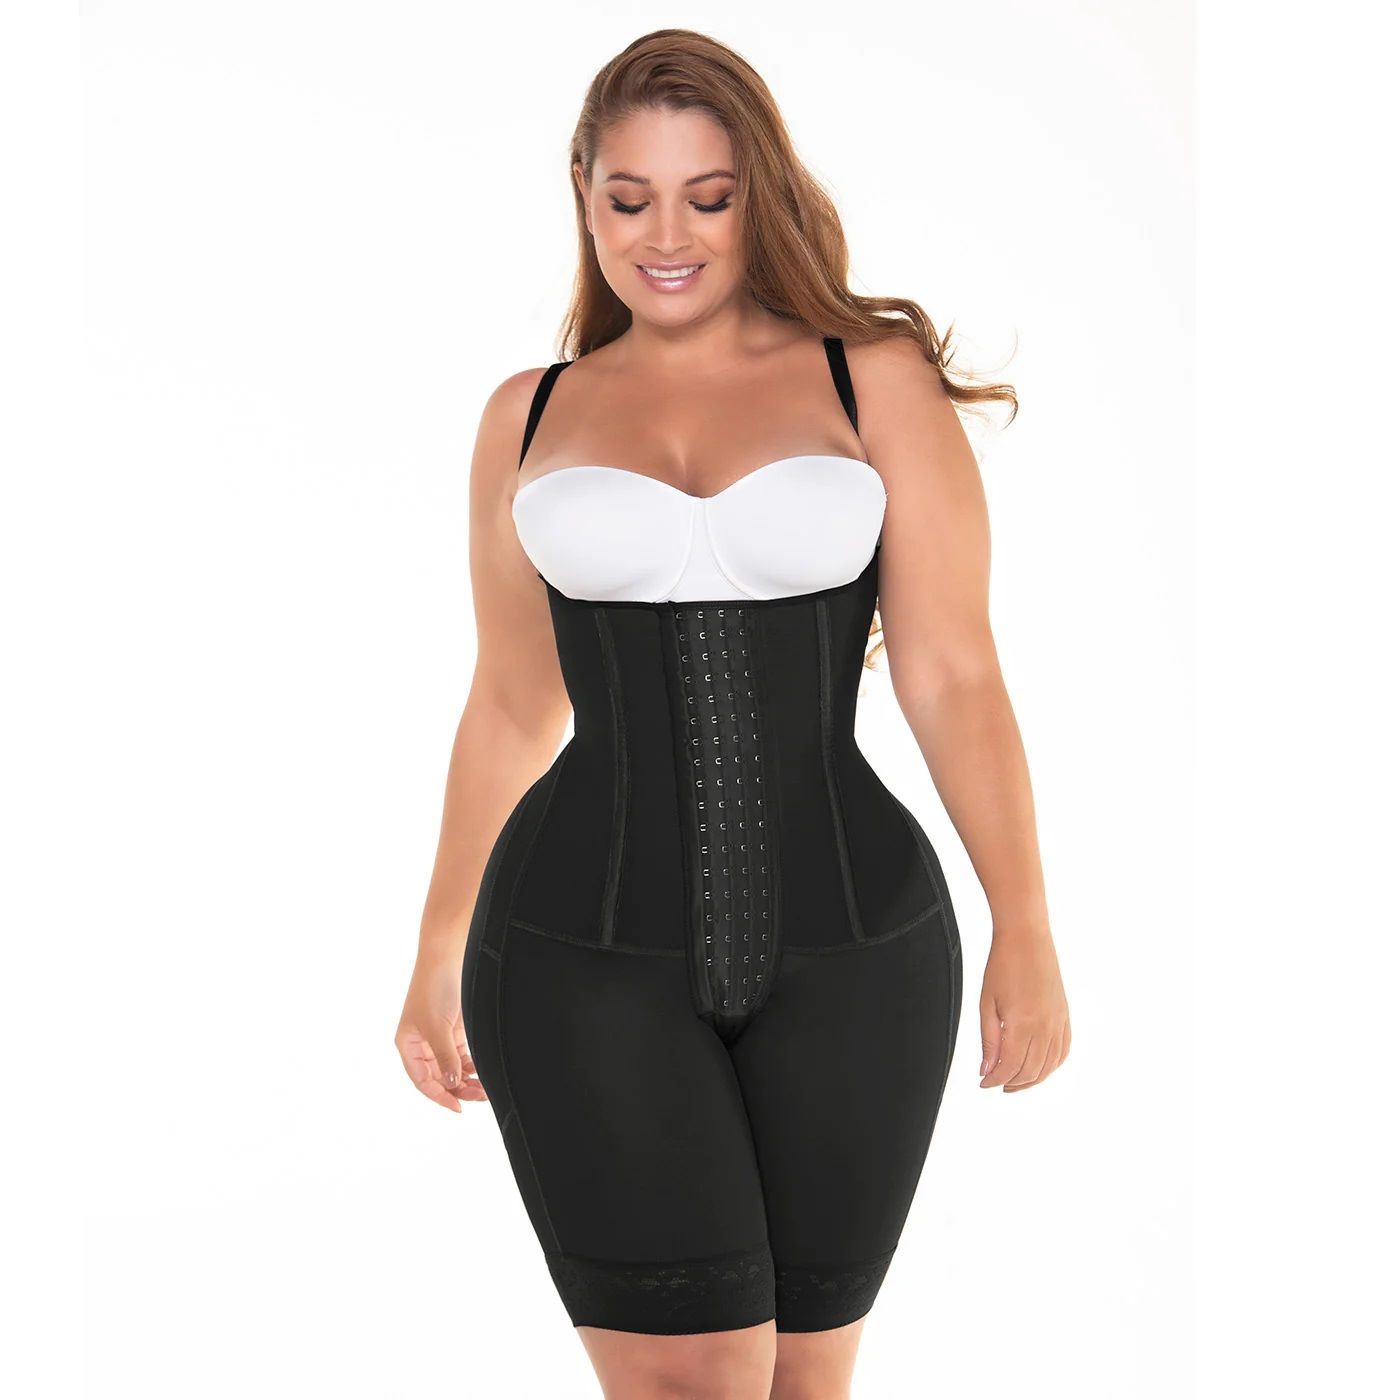 Curvy Mid-Thighs Wider Hips Smaller Waist with Rods – MODACOLOMBIANAUSA